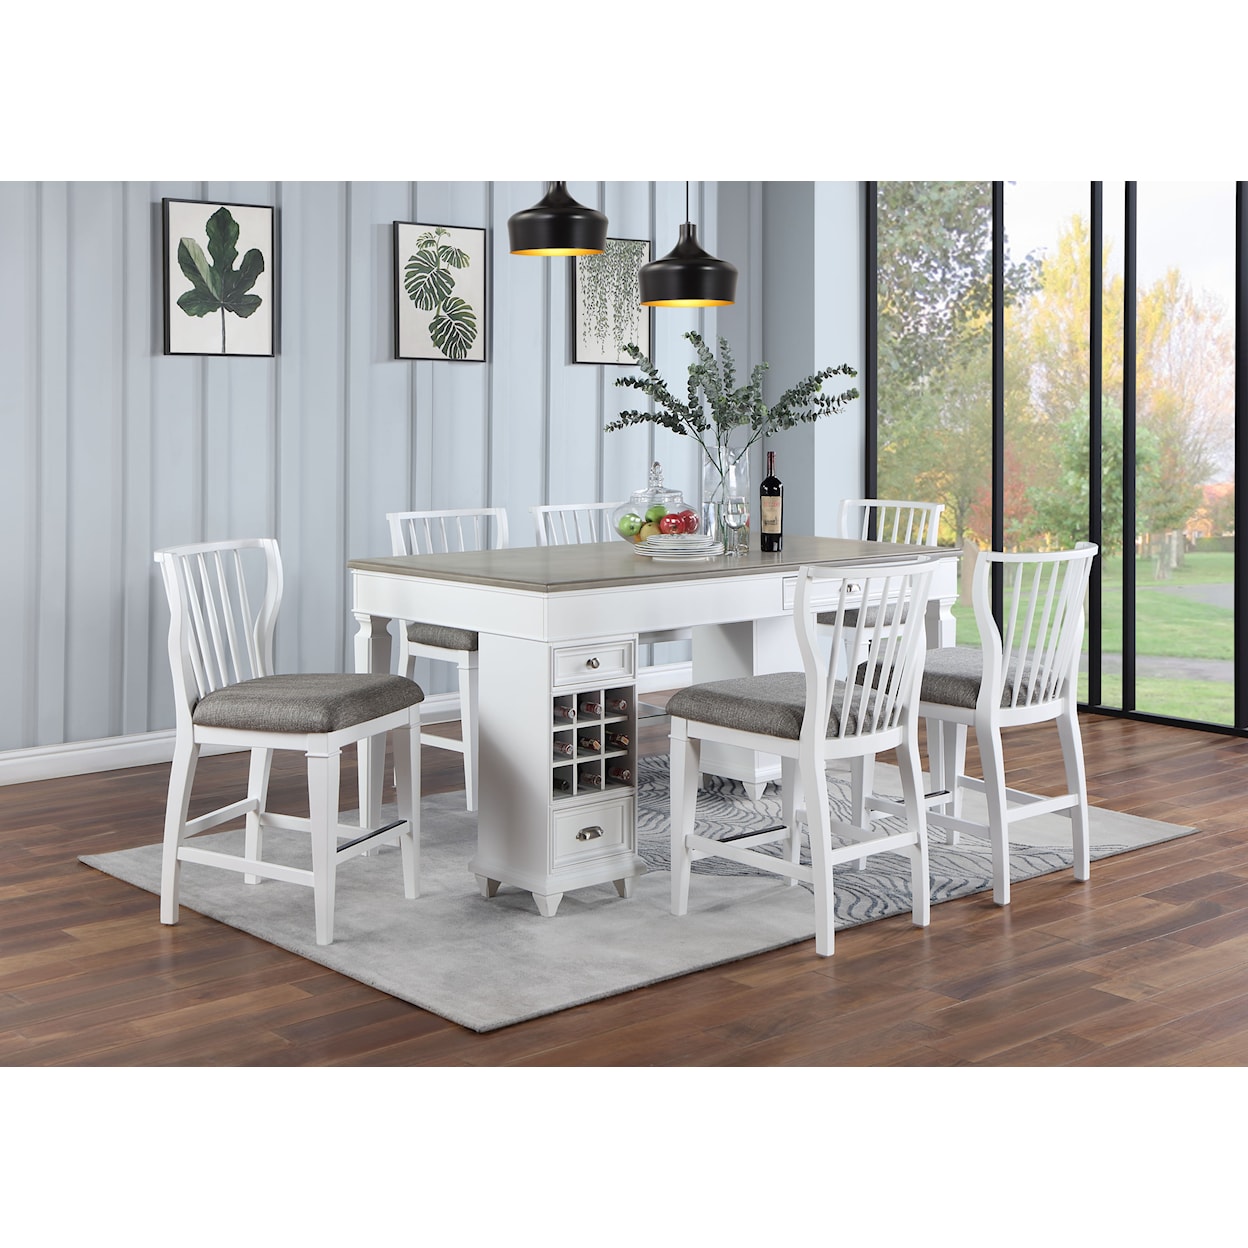 Holland House 6592 7-Piece Counter Height Dining Set